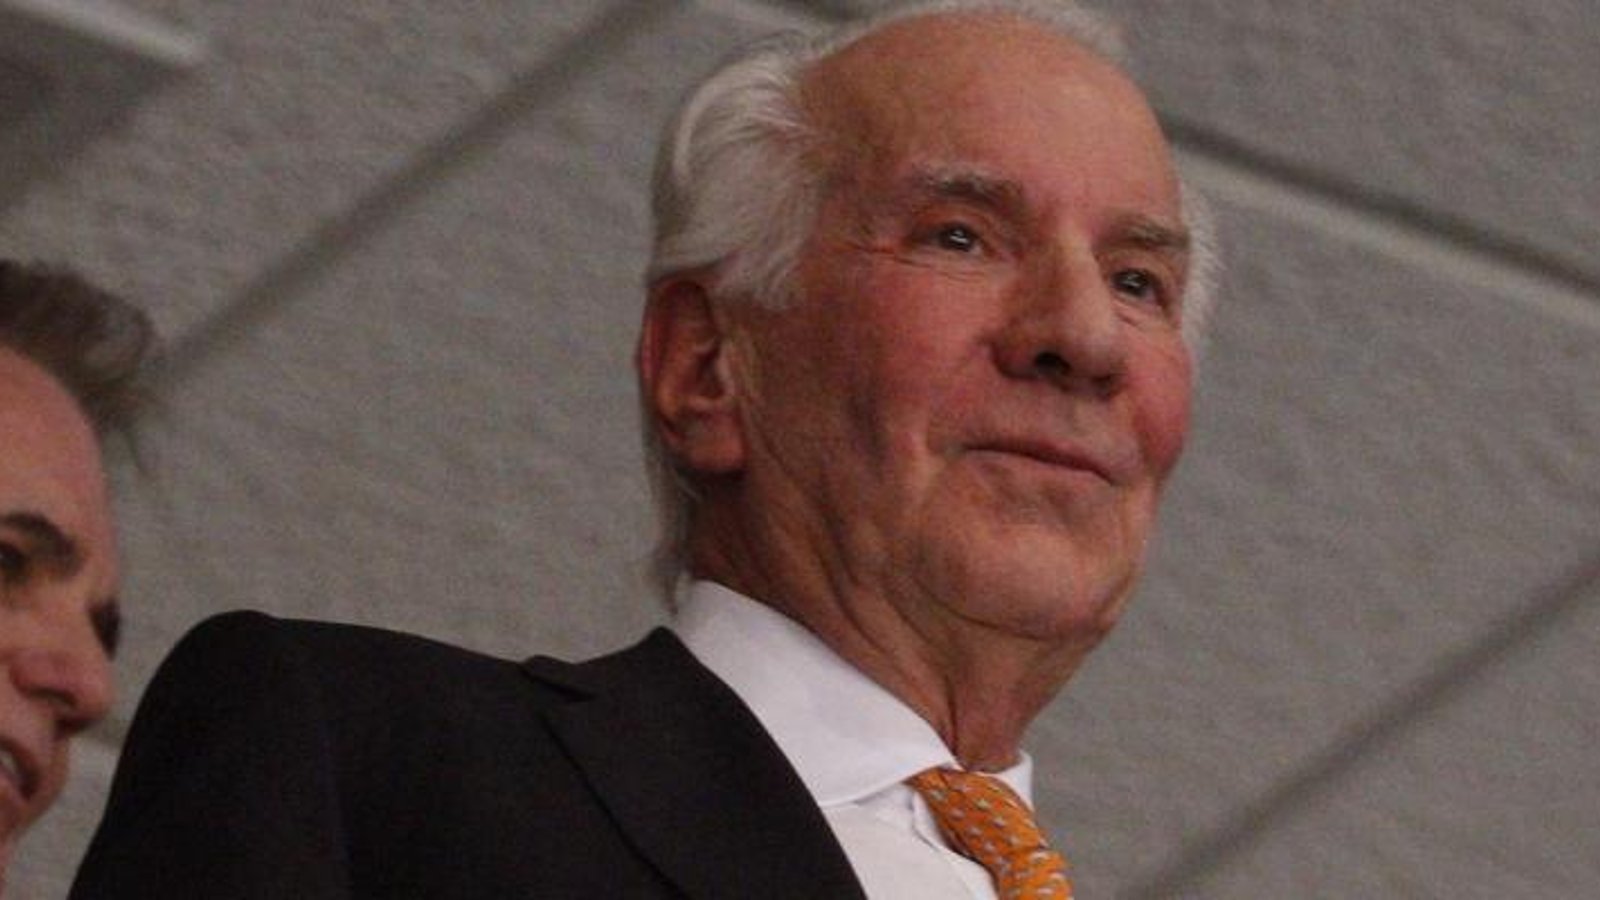 The Flyers will honor founder Ed Snider with important addition to Wells Fargo Center.